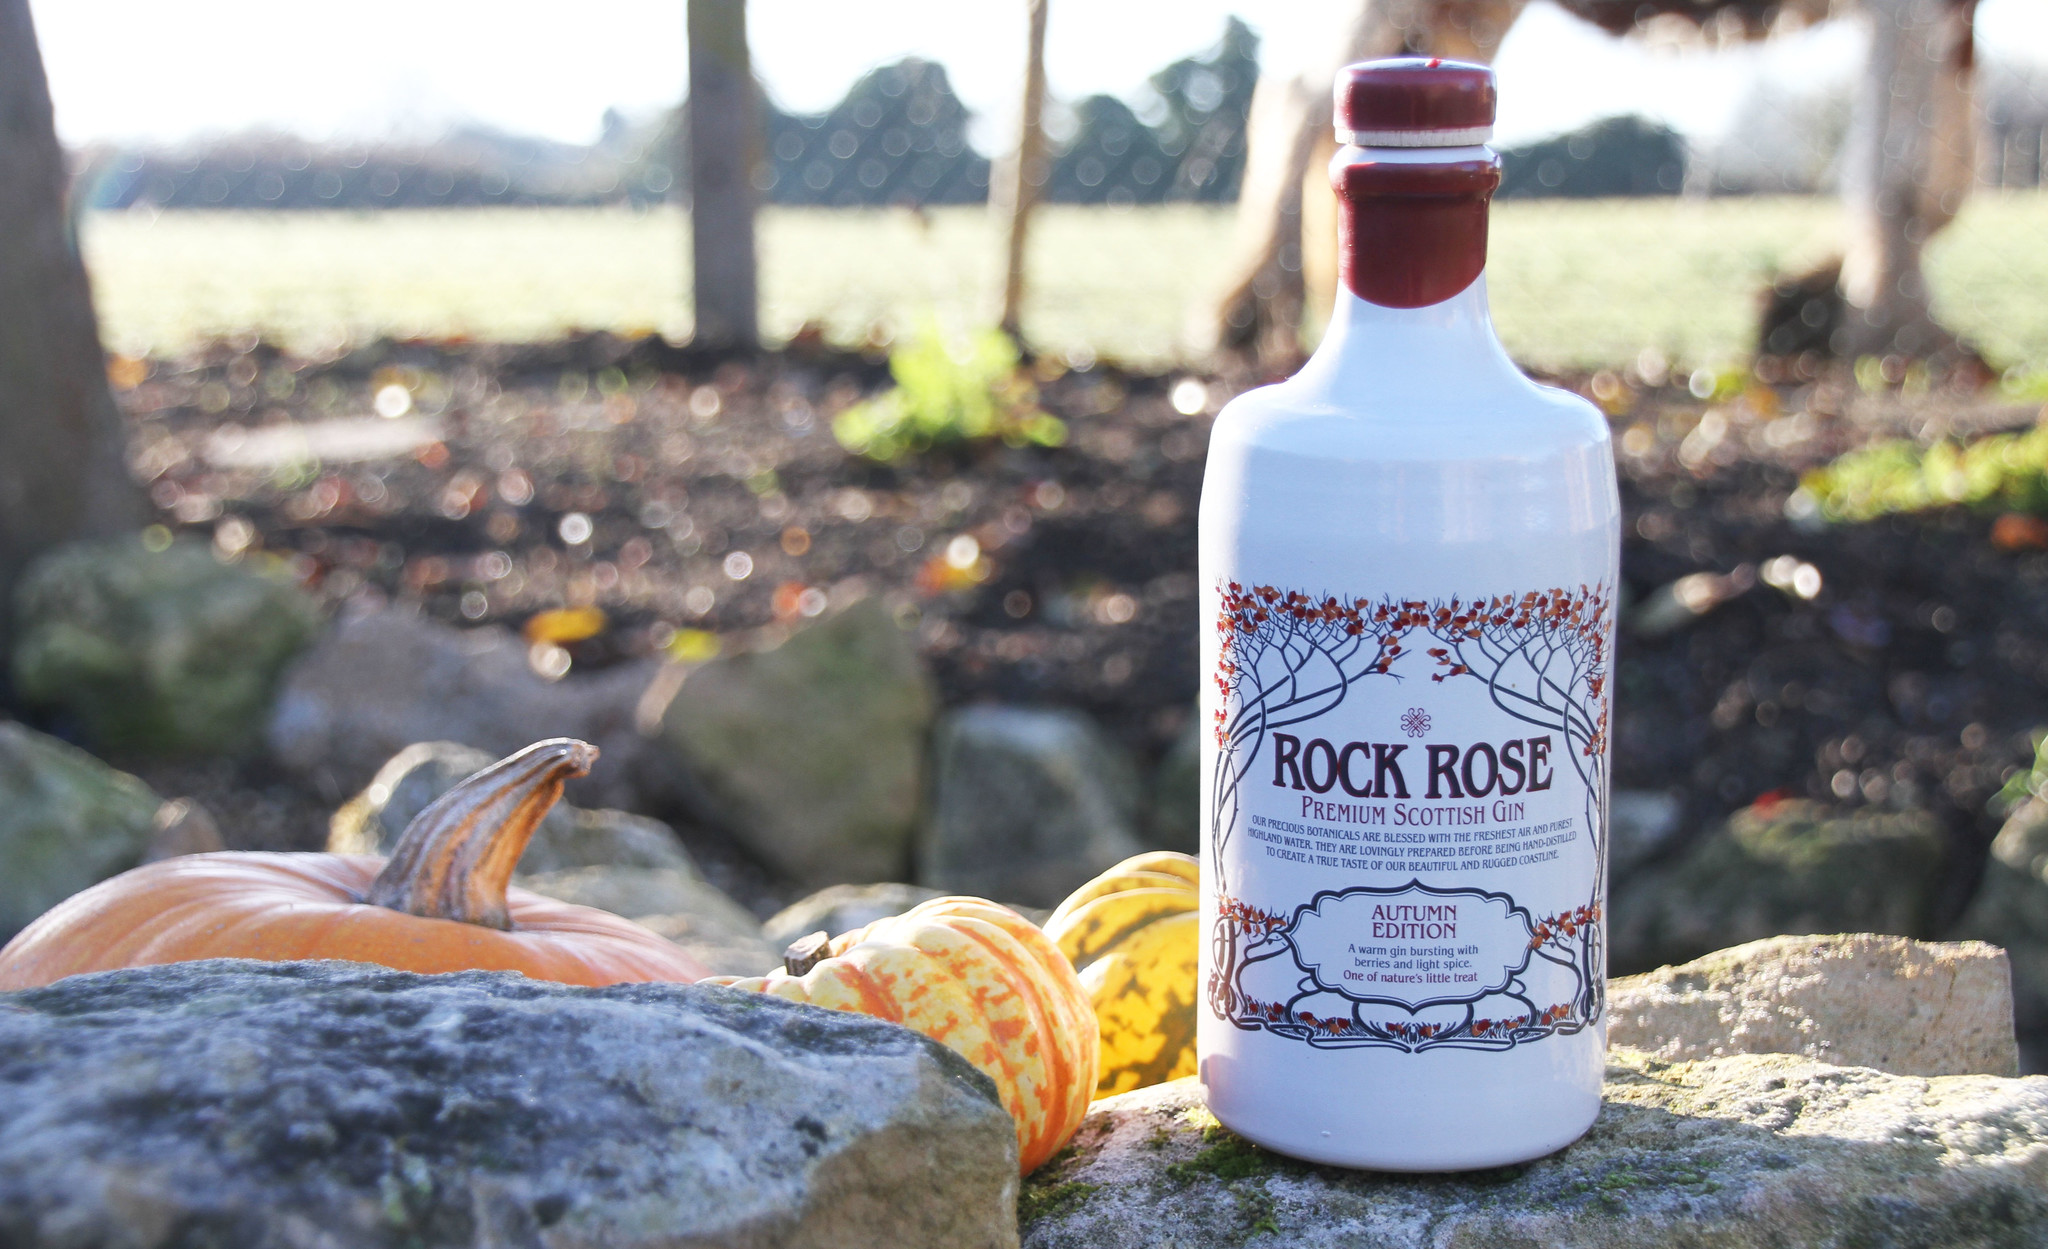 Autumn Edition of Rock Rose